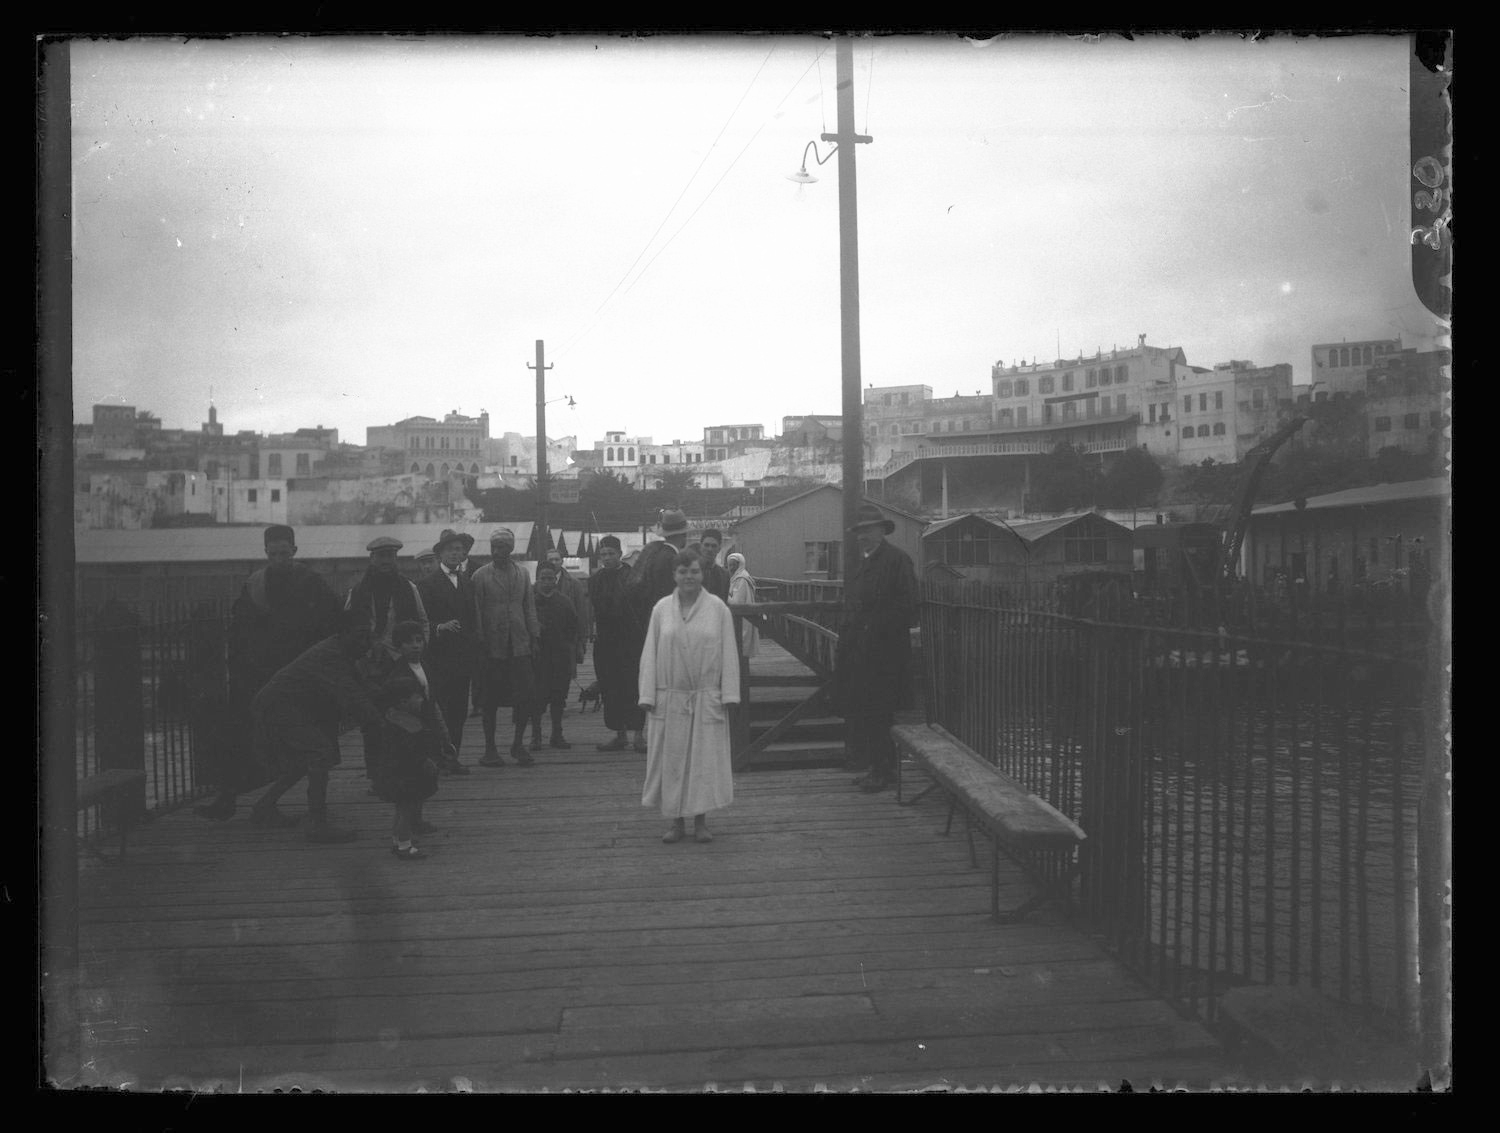 Millie Hudson (or possibly Mercedes Gleitze) in a robe on the quai, with the city in the background